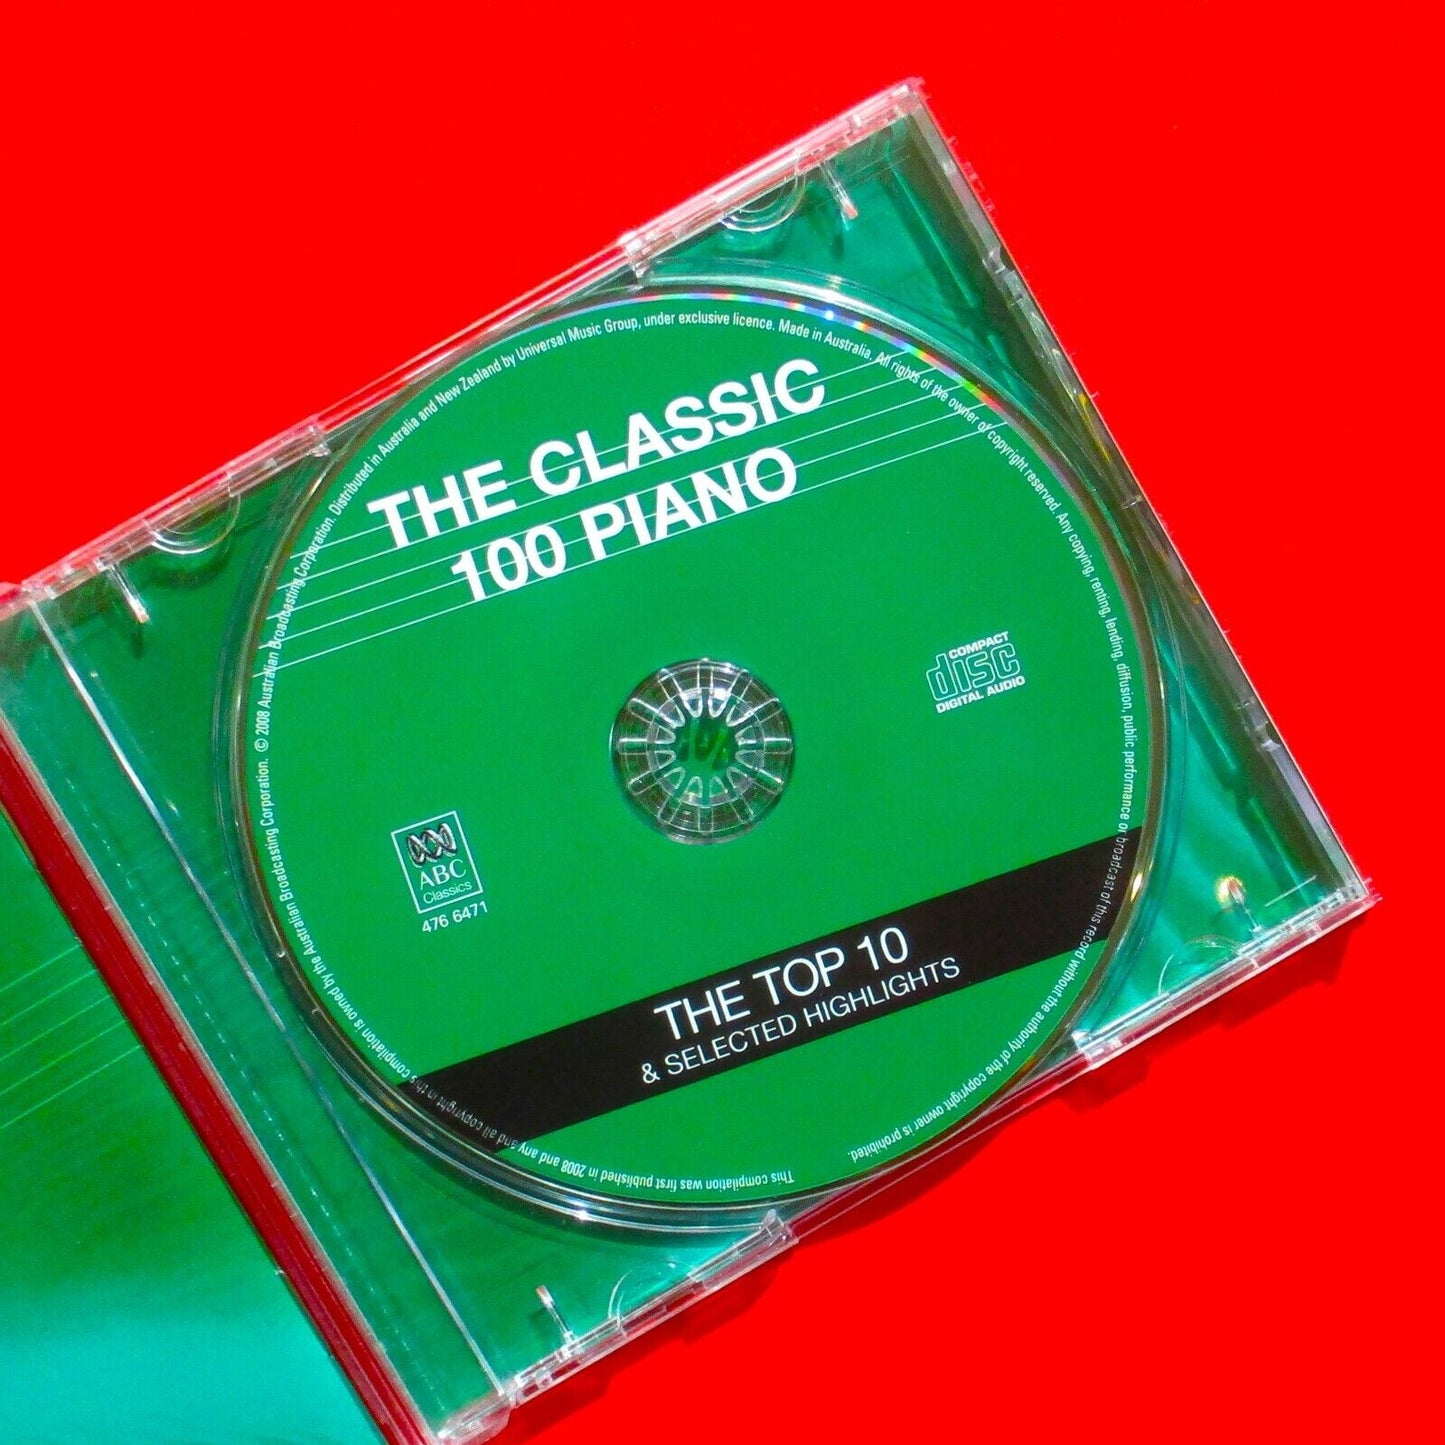 The Classic 100 Piano: The Top 10 & Selected Highlights ABC Classics 2005 CD